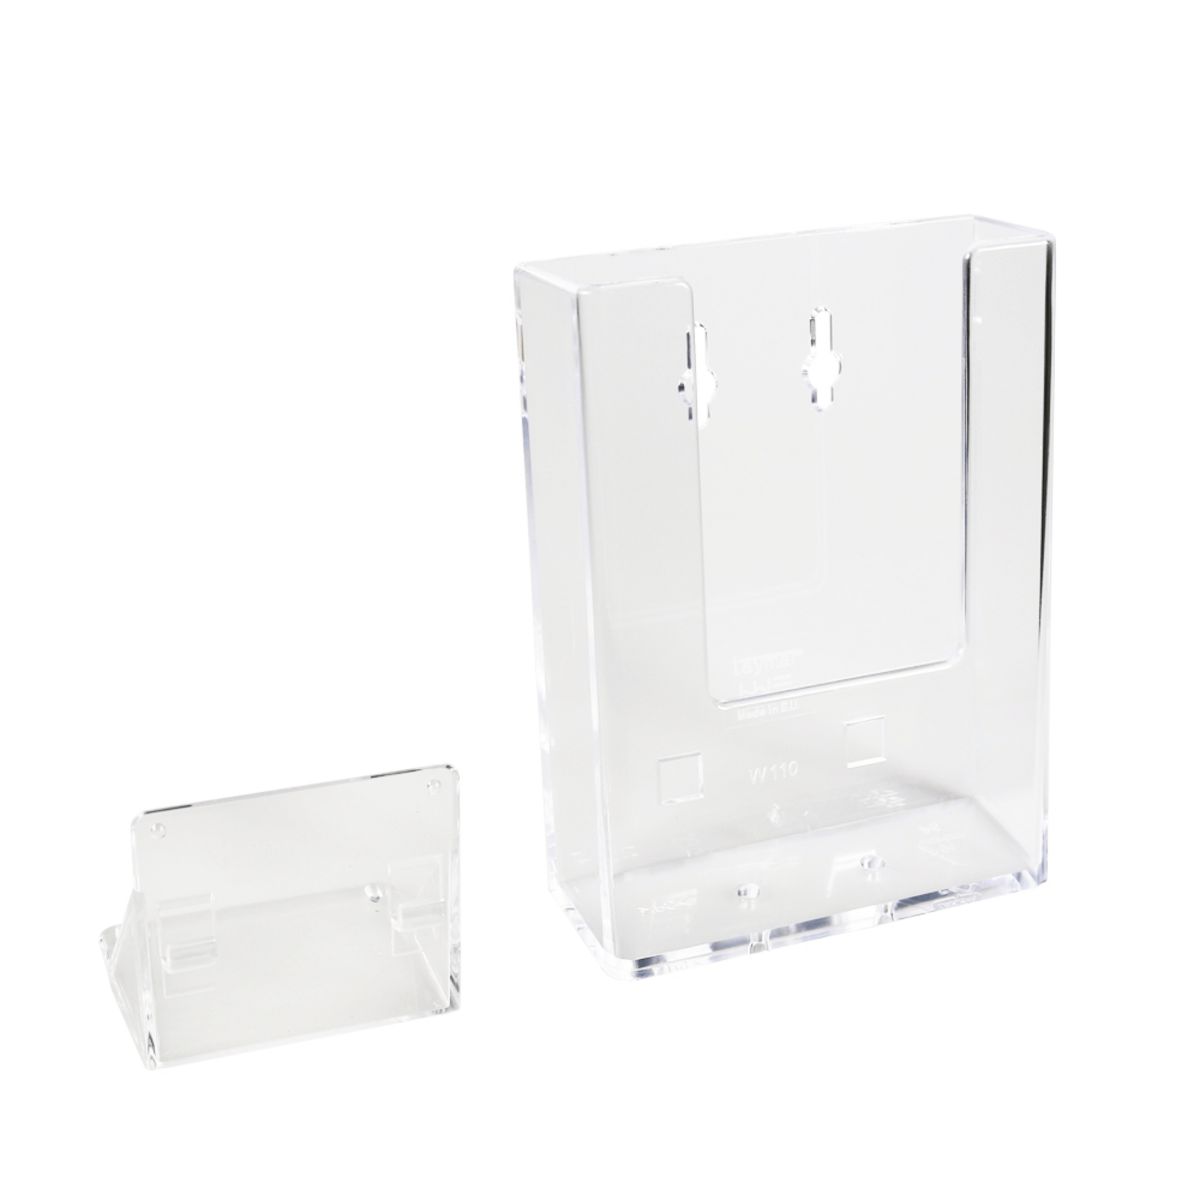 Leaflet holder in portrait orientation, made from clear styrene.png